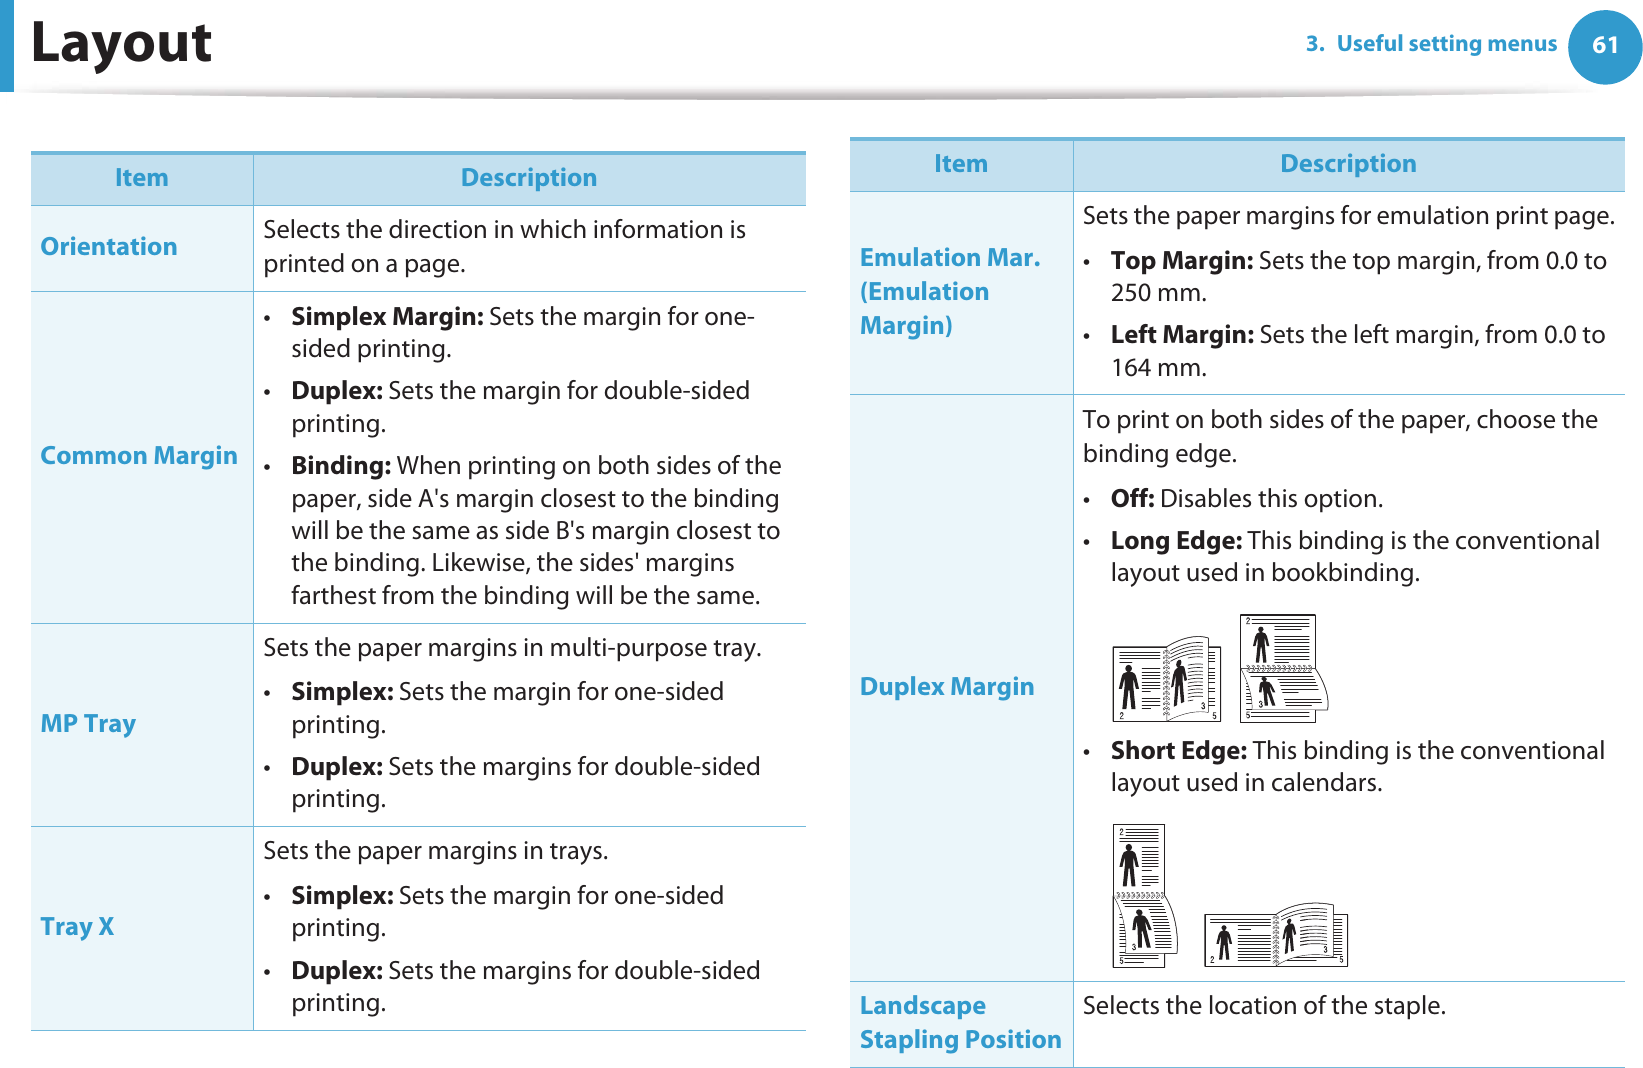 613. Useful setting menusLayoutItem DescriptionOrientation Selects the direction in which information is printed on a page.Common Margin•Simplex Margin: Sets the margin for one-sided printing.•Duplex: Sets the margin for double-sided printing.•Binding: When printing on both sides of the paper, side A&apos;s margin closest to the binding will be the same as side B&apos;s margin closest to the binding. Likewise, the sides&apos; margins farthest from the binding will be the same. MP TraySets the paper margins in multi-purpose tray.•Simplex: Sets the margin for one-sided printing.•Duplex: Sets the margins for double-sided printing.Tray XSets the paper margins in trays.•Simplex: Sets the margin for one-sided printing.•Duplex: Sets the margins for double-sided printing.Emulation Mar. (Emulation Margin)Sets the paper margins for emulation print page.•Top Margin: Sets the top margin, from 0.0 to 250 mm. •Left Margin: Sets the left margin, from 0.0 to 164 mm. Duplex MarginTo print on both sides of the paper, choose the binding edge.•Off: Disables this option.•Long Edge: This binding is the conventional layout used in bookbinding.•Short Edge: This binding is the conventional layout used in calendars.Landscape Stapling PositionSelects the location of the staple.Item Description